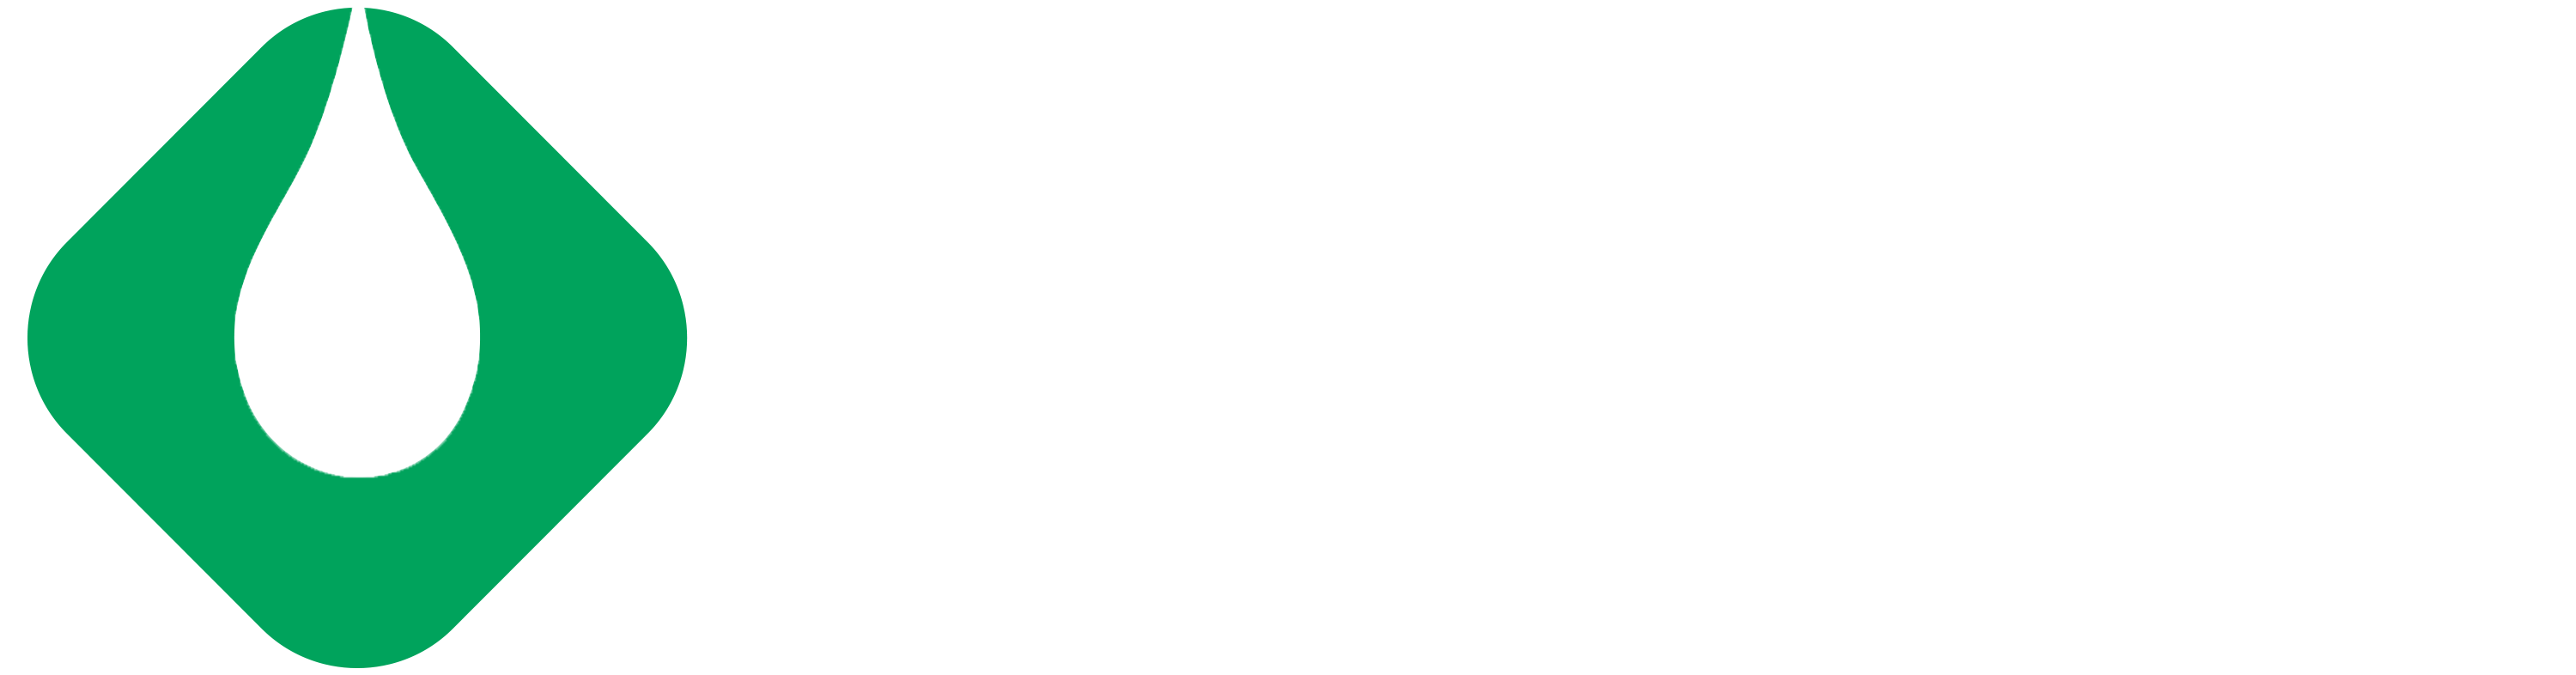 Global Fueling Systems logo